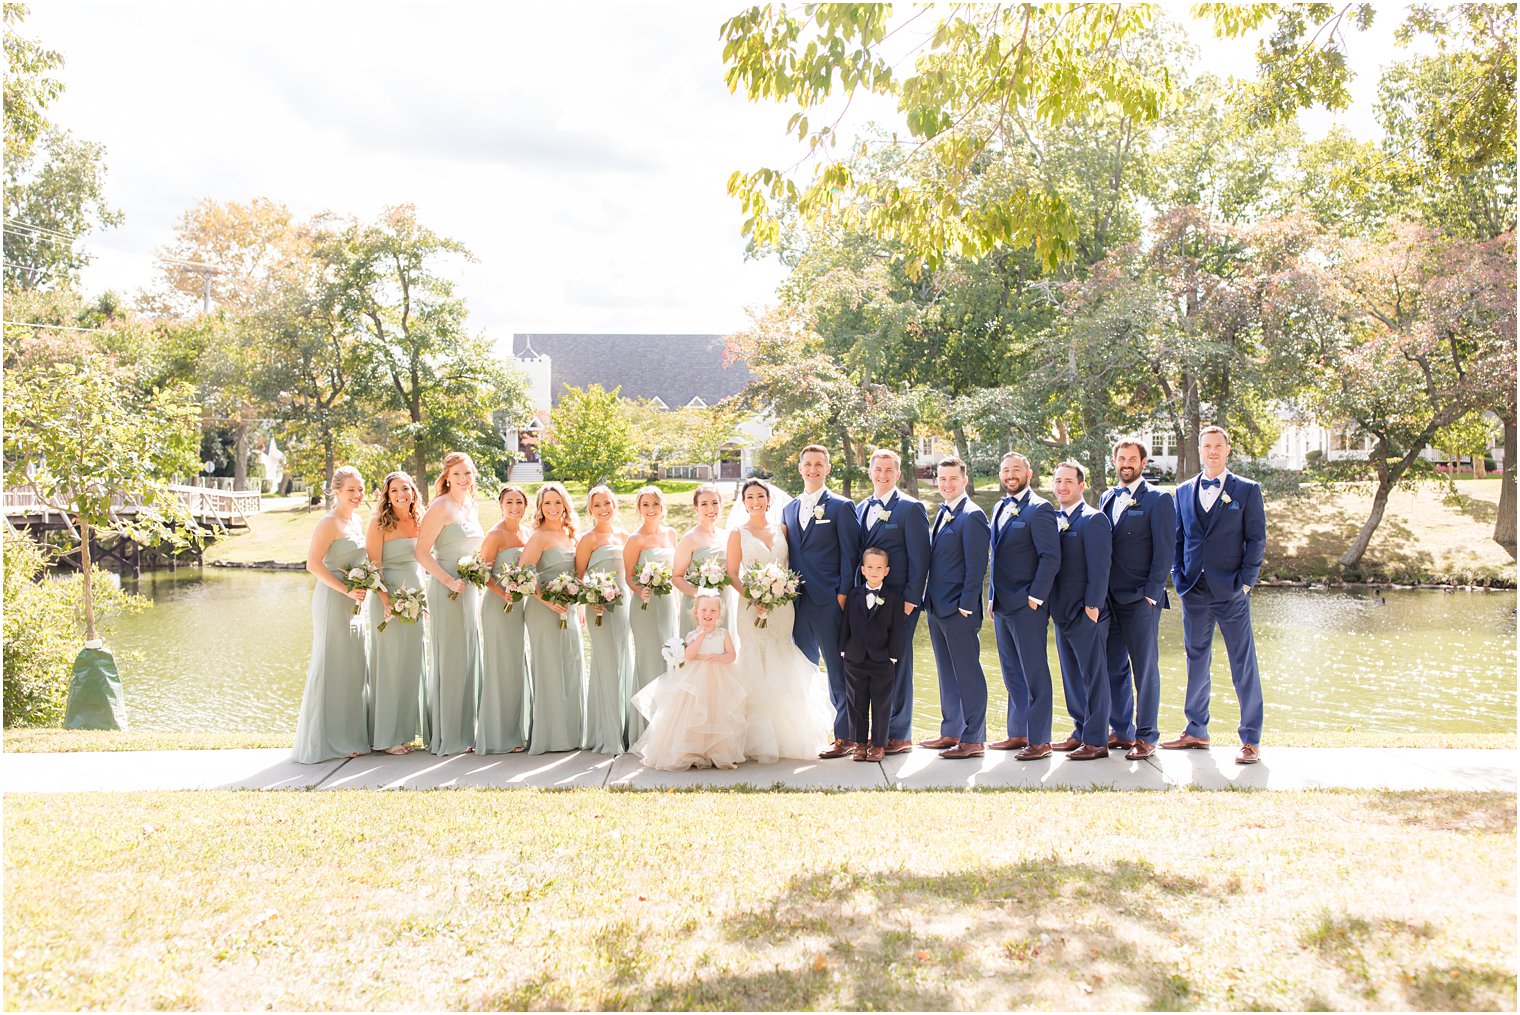 bride and groom stand with wedding party in sage green and navy blue